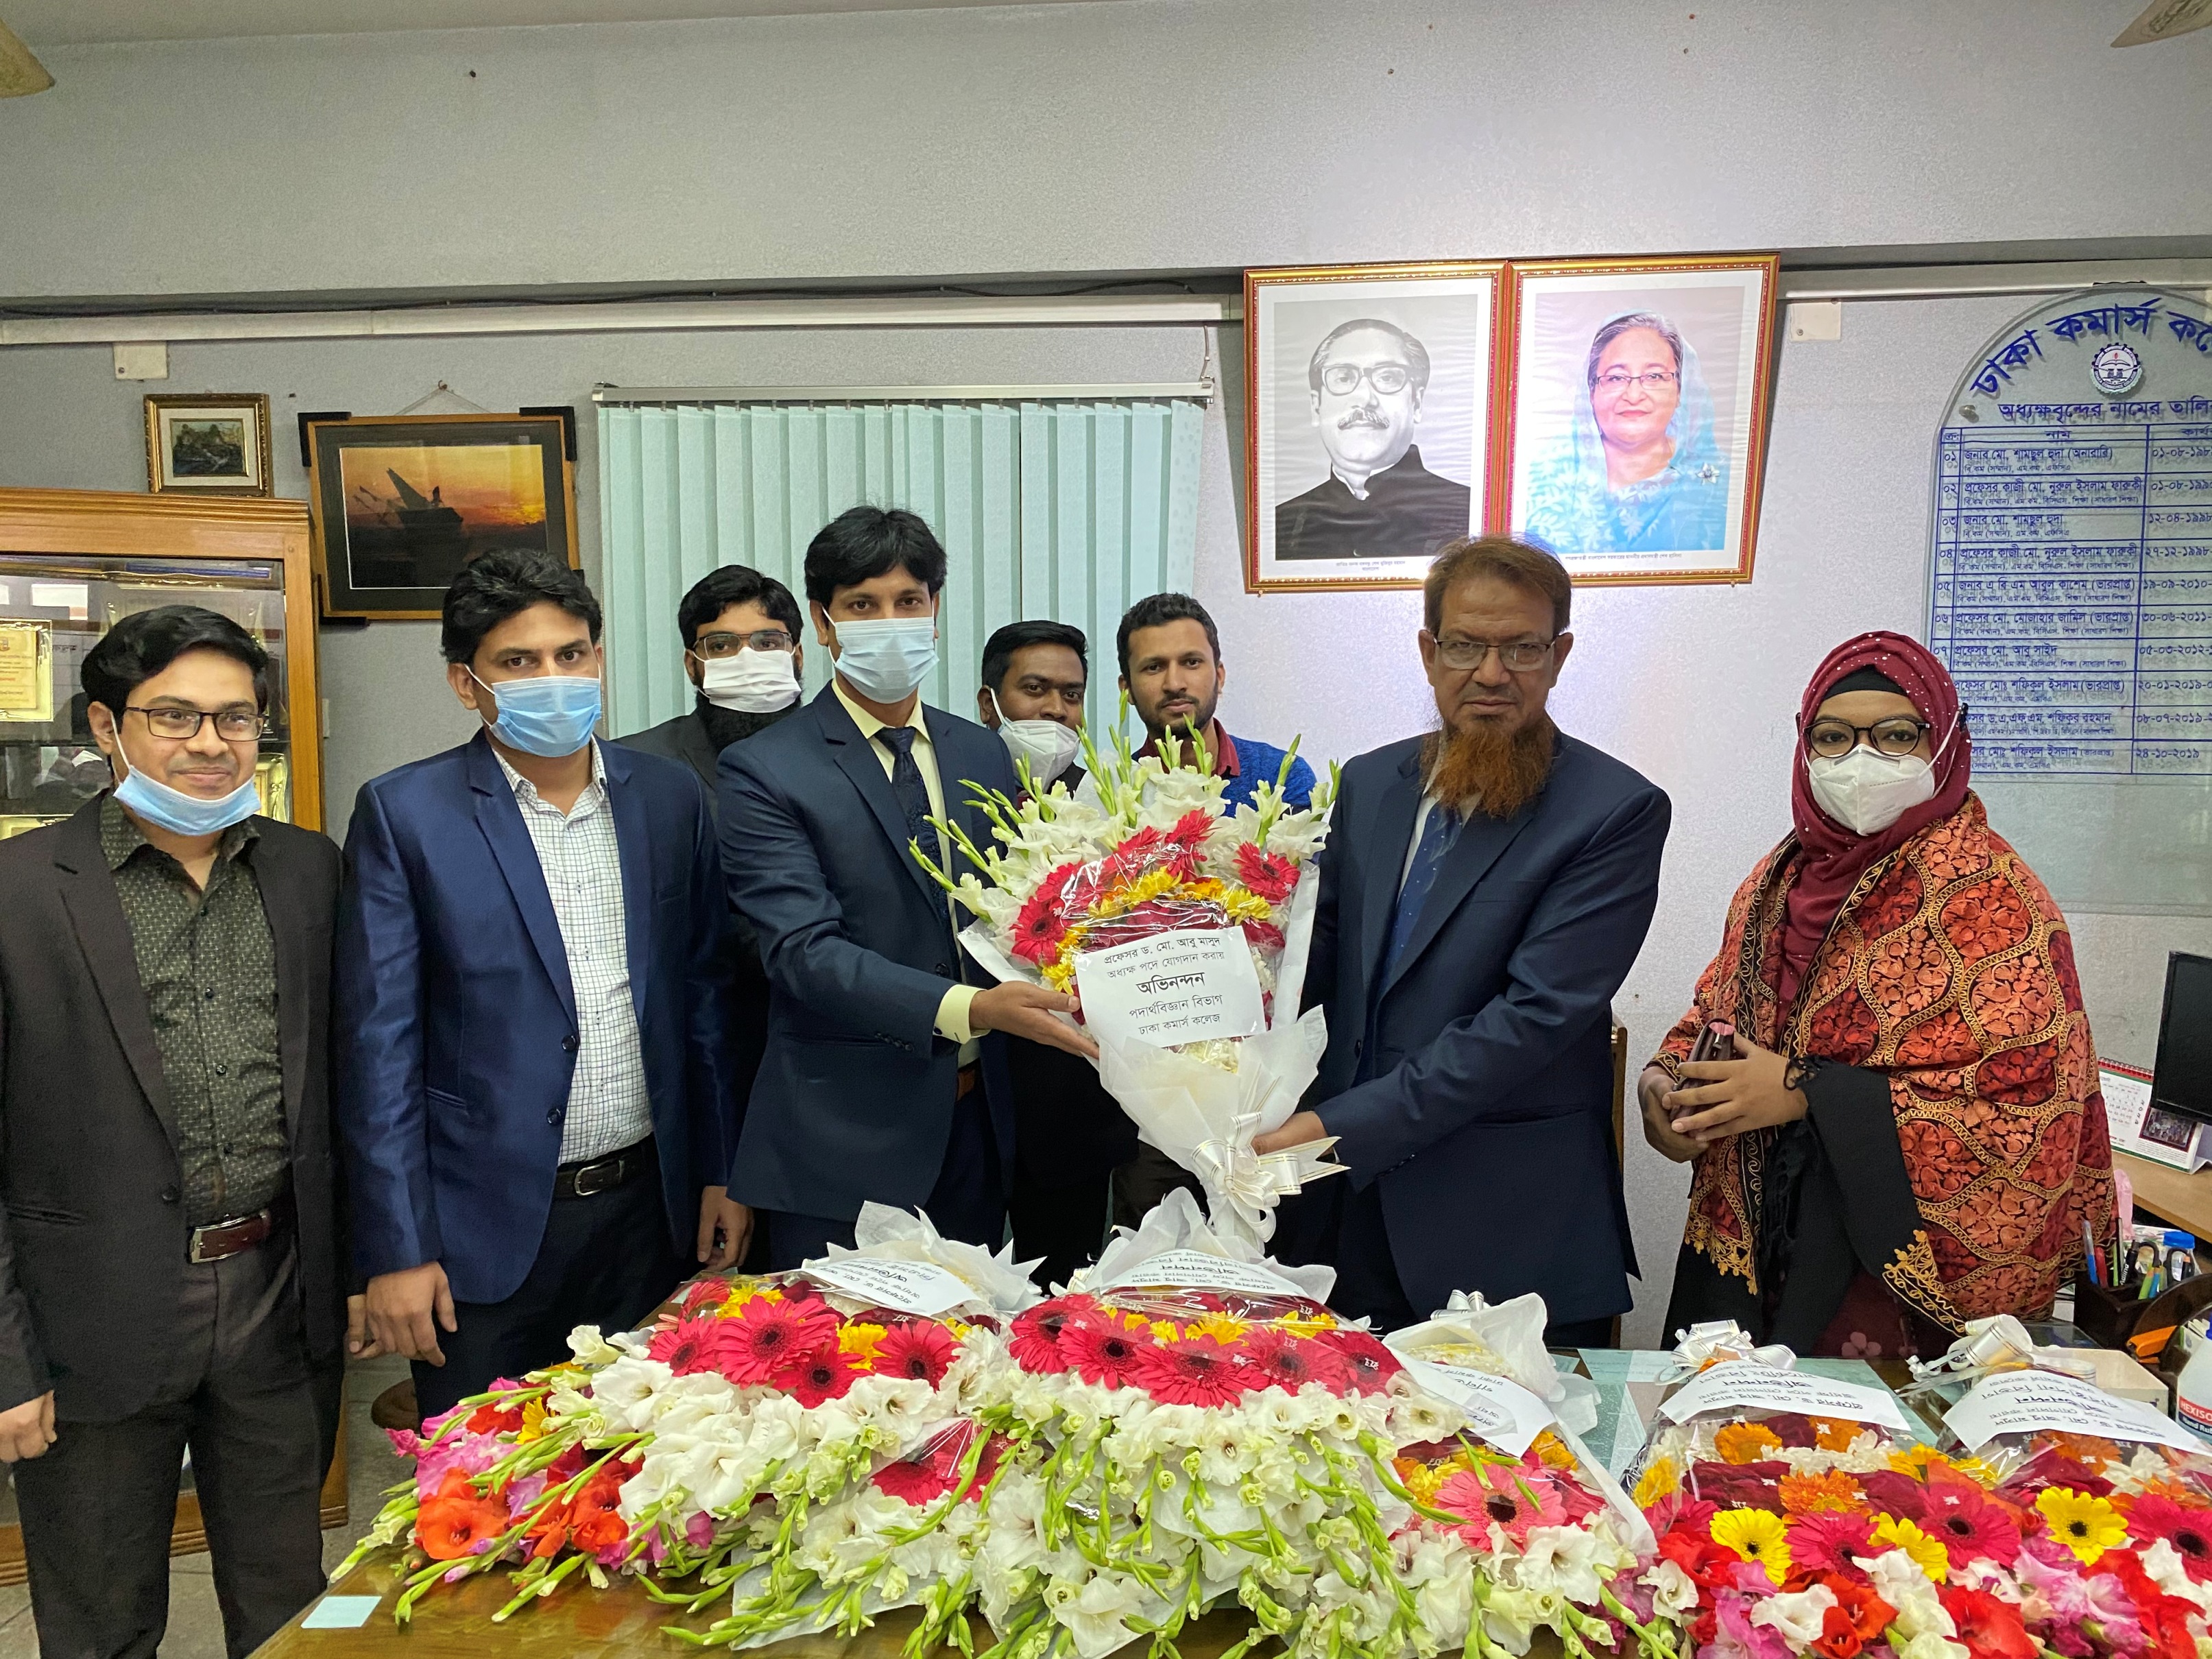 Reception to Principal Prof. Dr. Md. Abu Masud by Physics Department